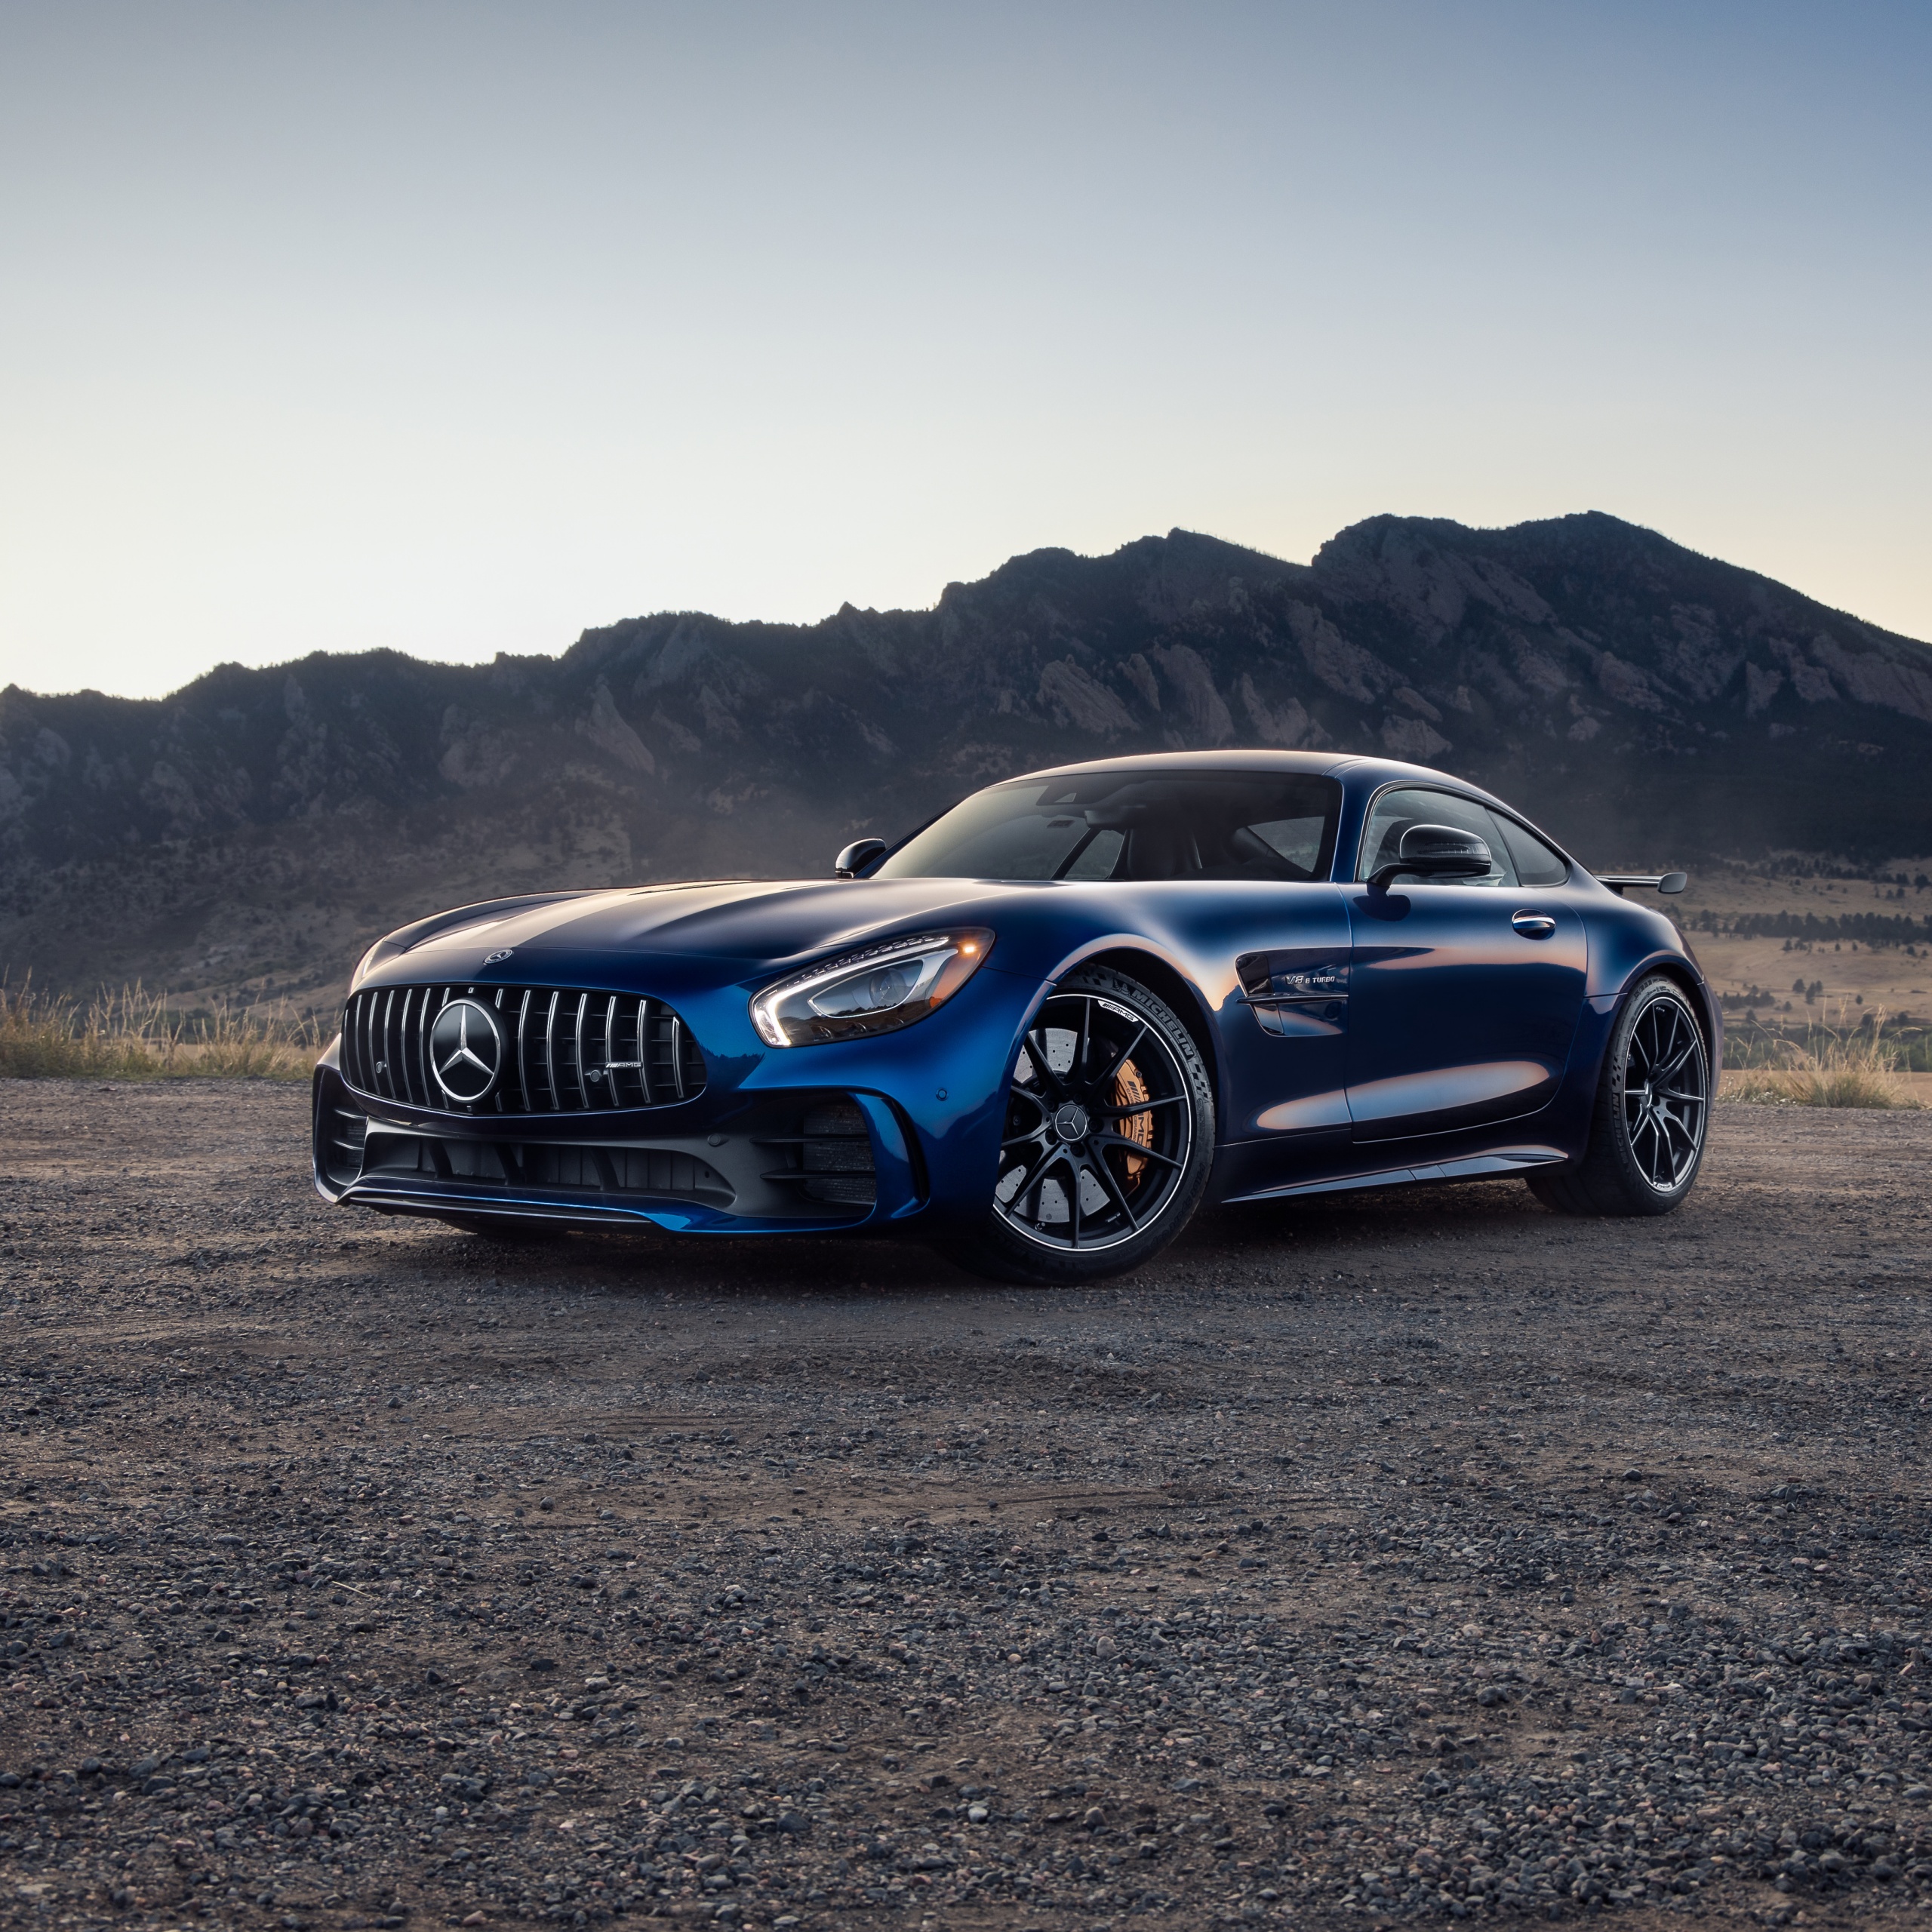 Collection 94+ Images x1440 amg gt-r wallpapers Latest